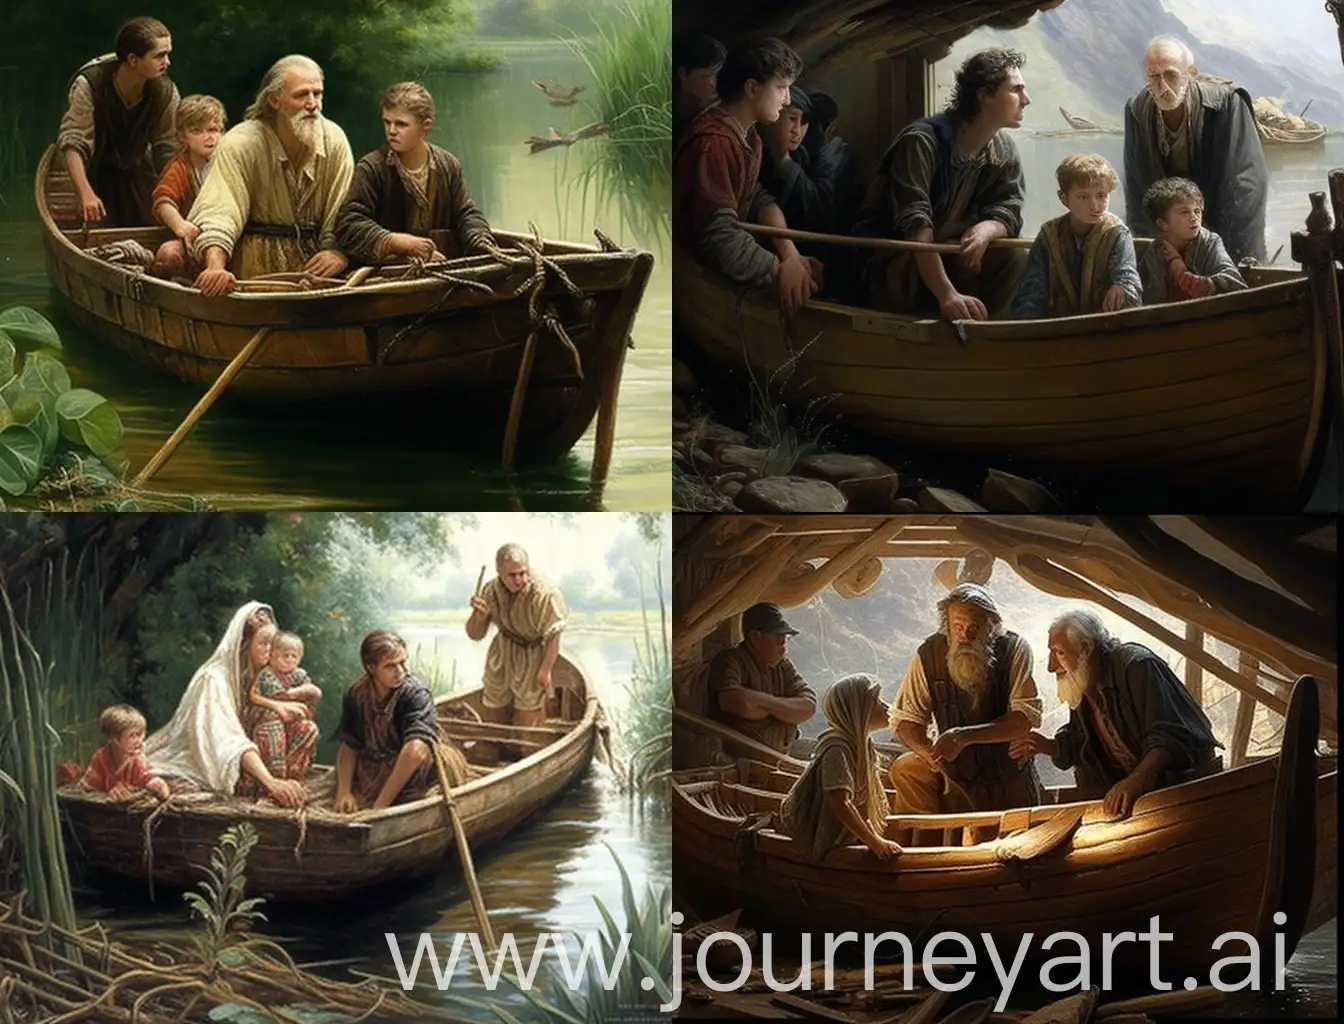 I am looking for Nephi and his family building a boat in the 600 bc